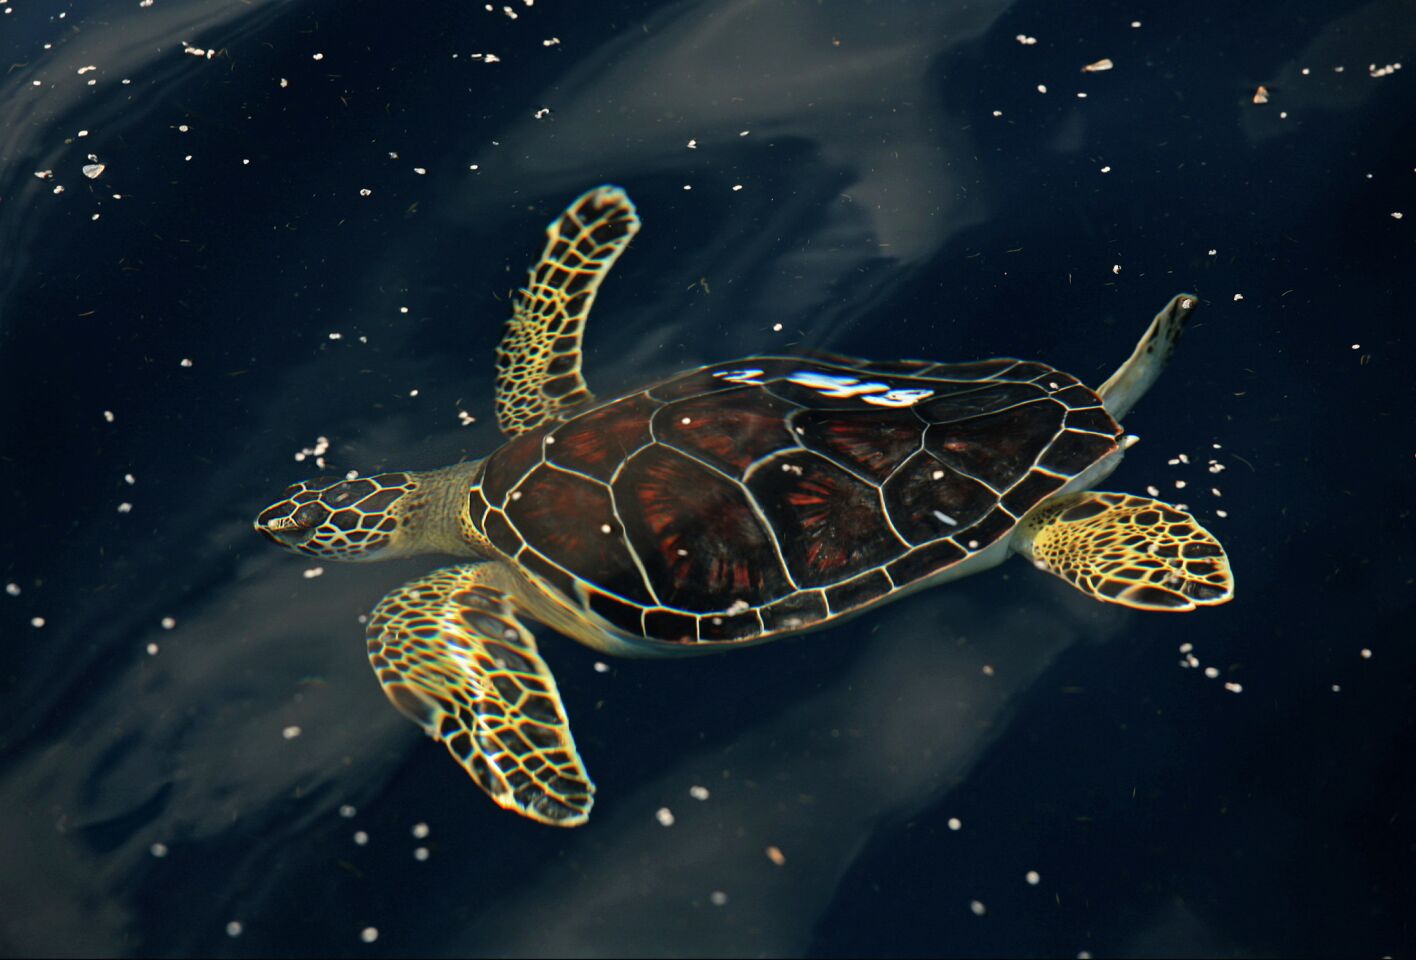 A green turtle swims in the Gulf of Mexico in October 2010 after being captured months before due to the BP oil spill. Thirty-two sea turtles were returned to federal waters some 50 miles south of Grande Isle, La.